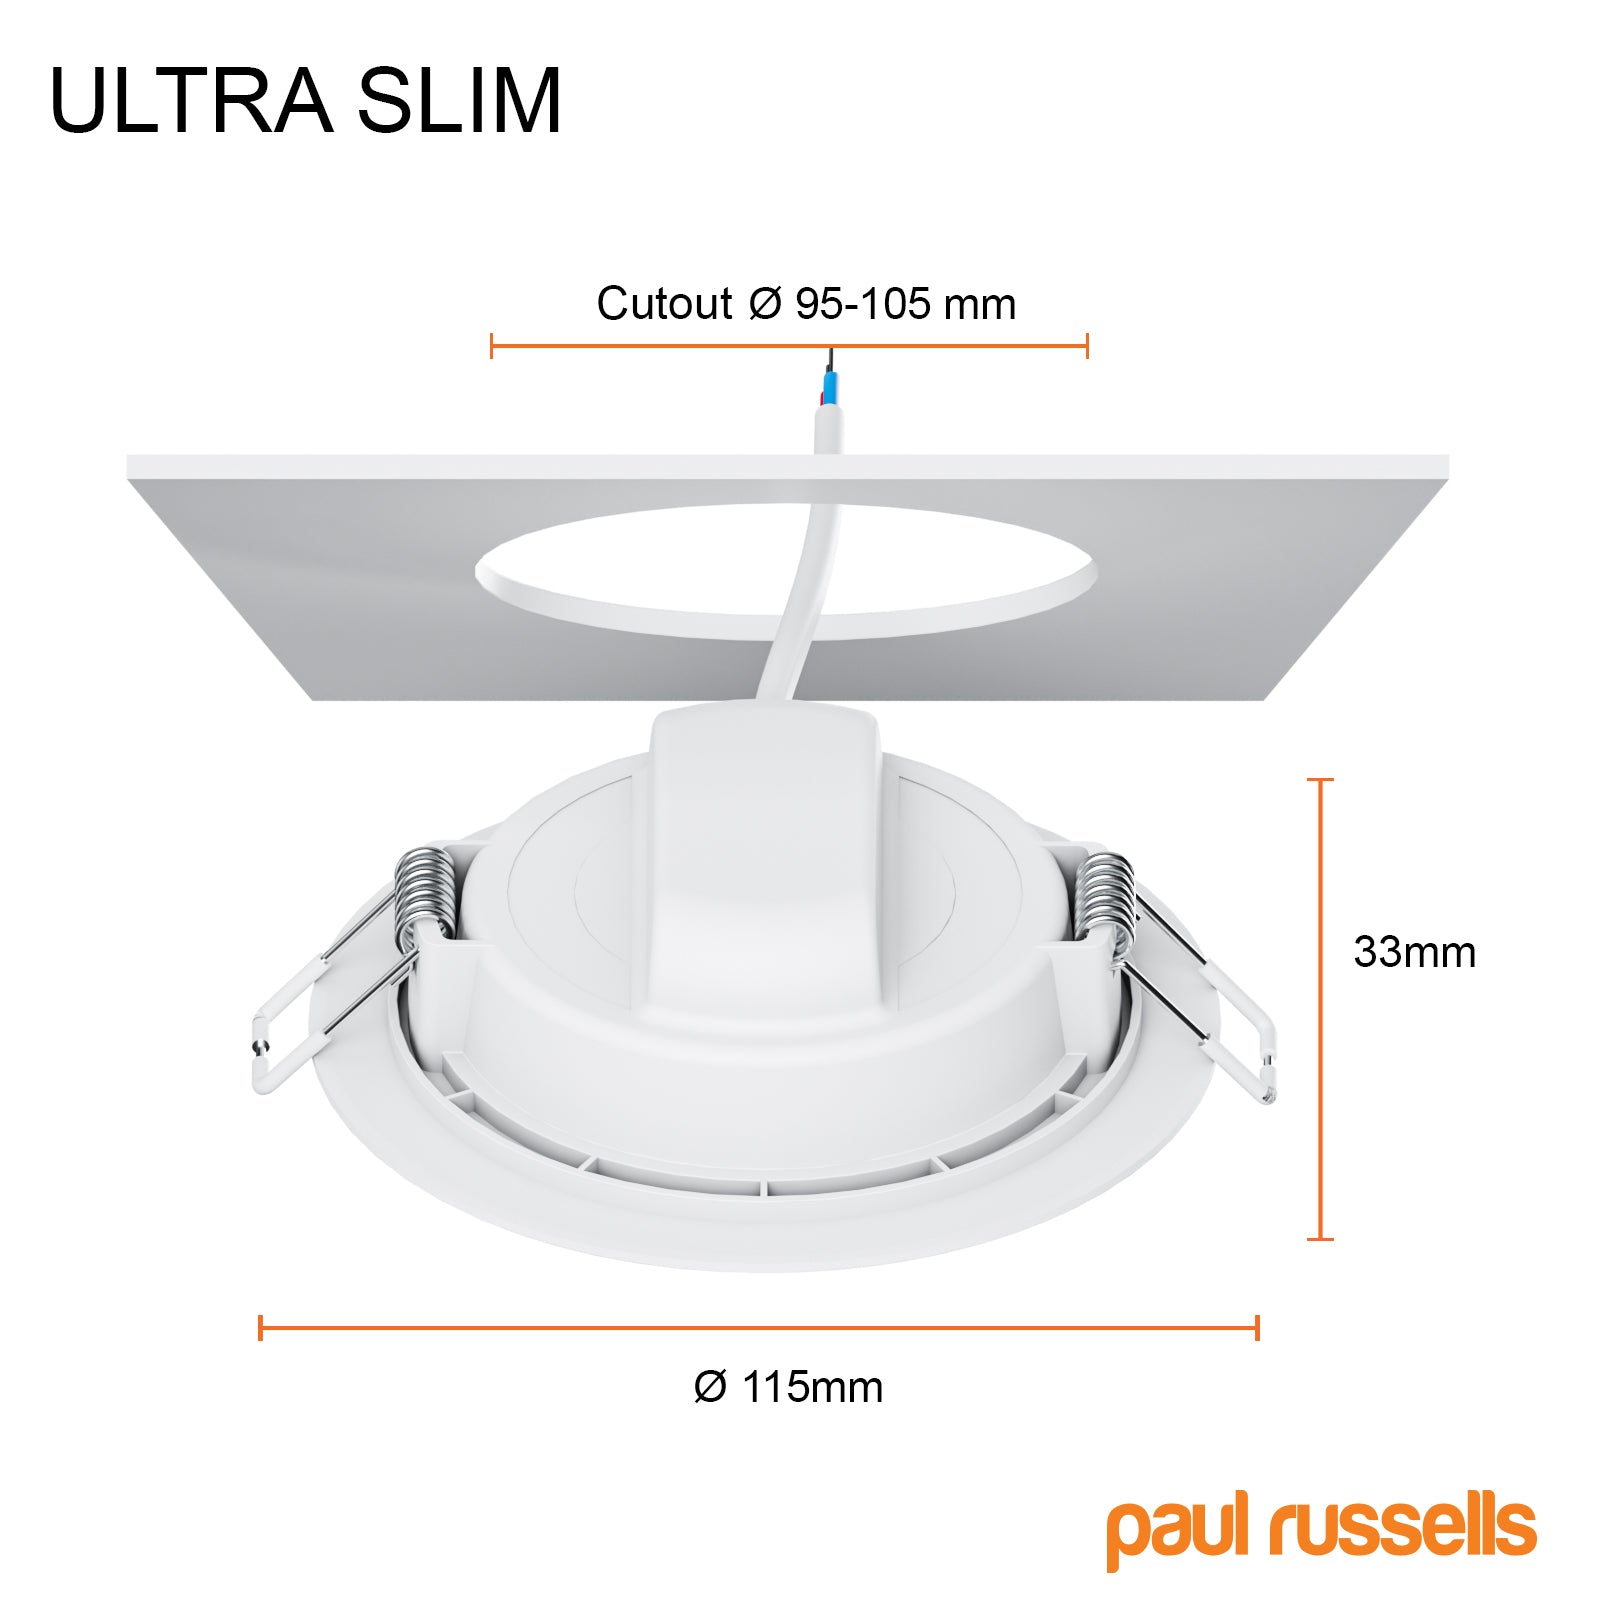 8W, LED Round Ceiling Downlights, 750 Lumens, 4000K Cool White, Non-Dimmable Panel Spotlights